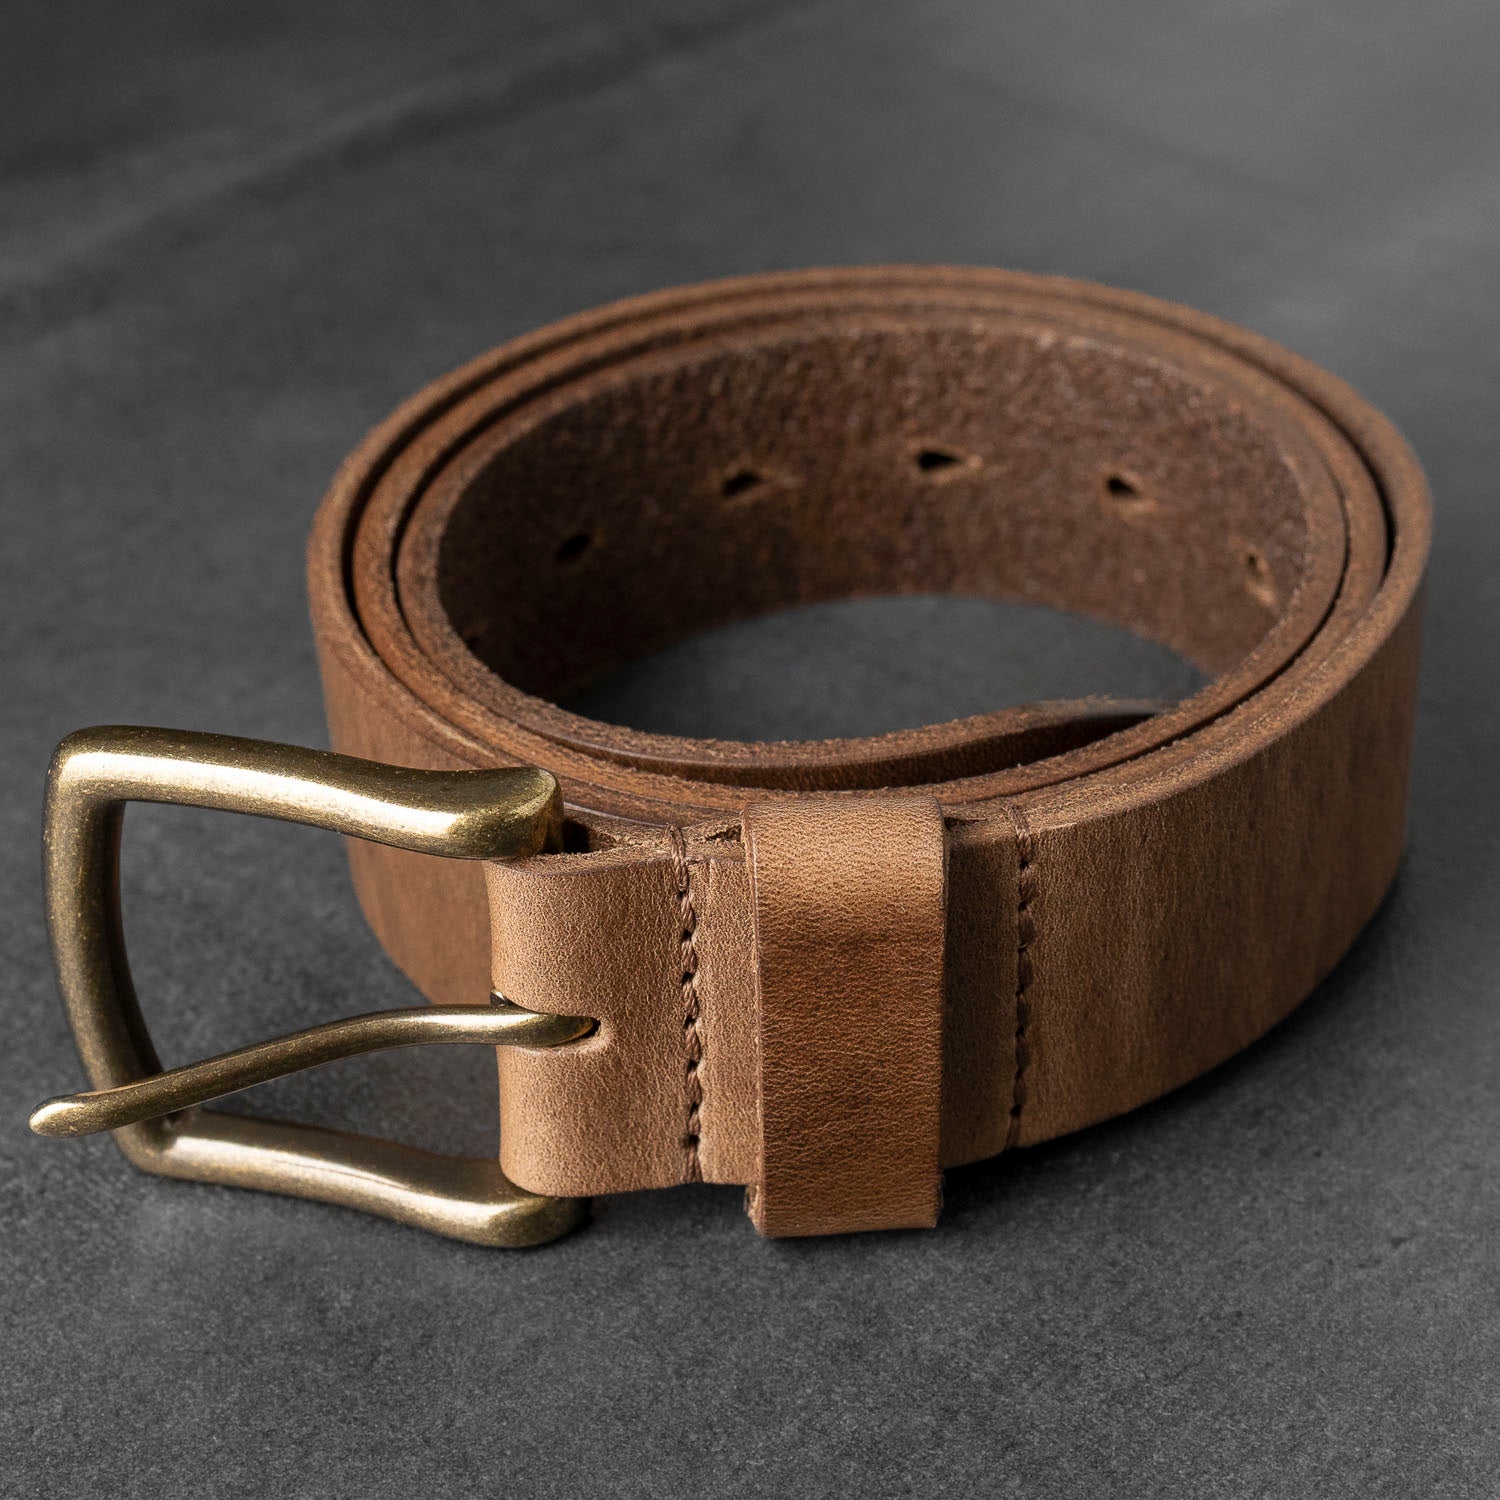 Distressed Brown Leather Belt, Handmade in Seattle